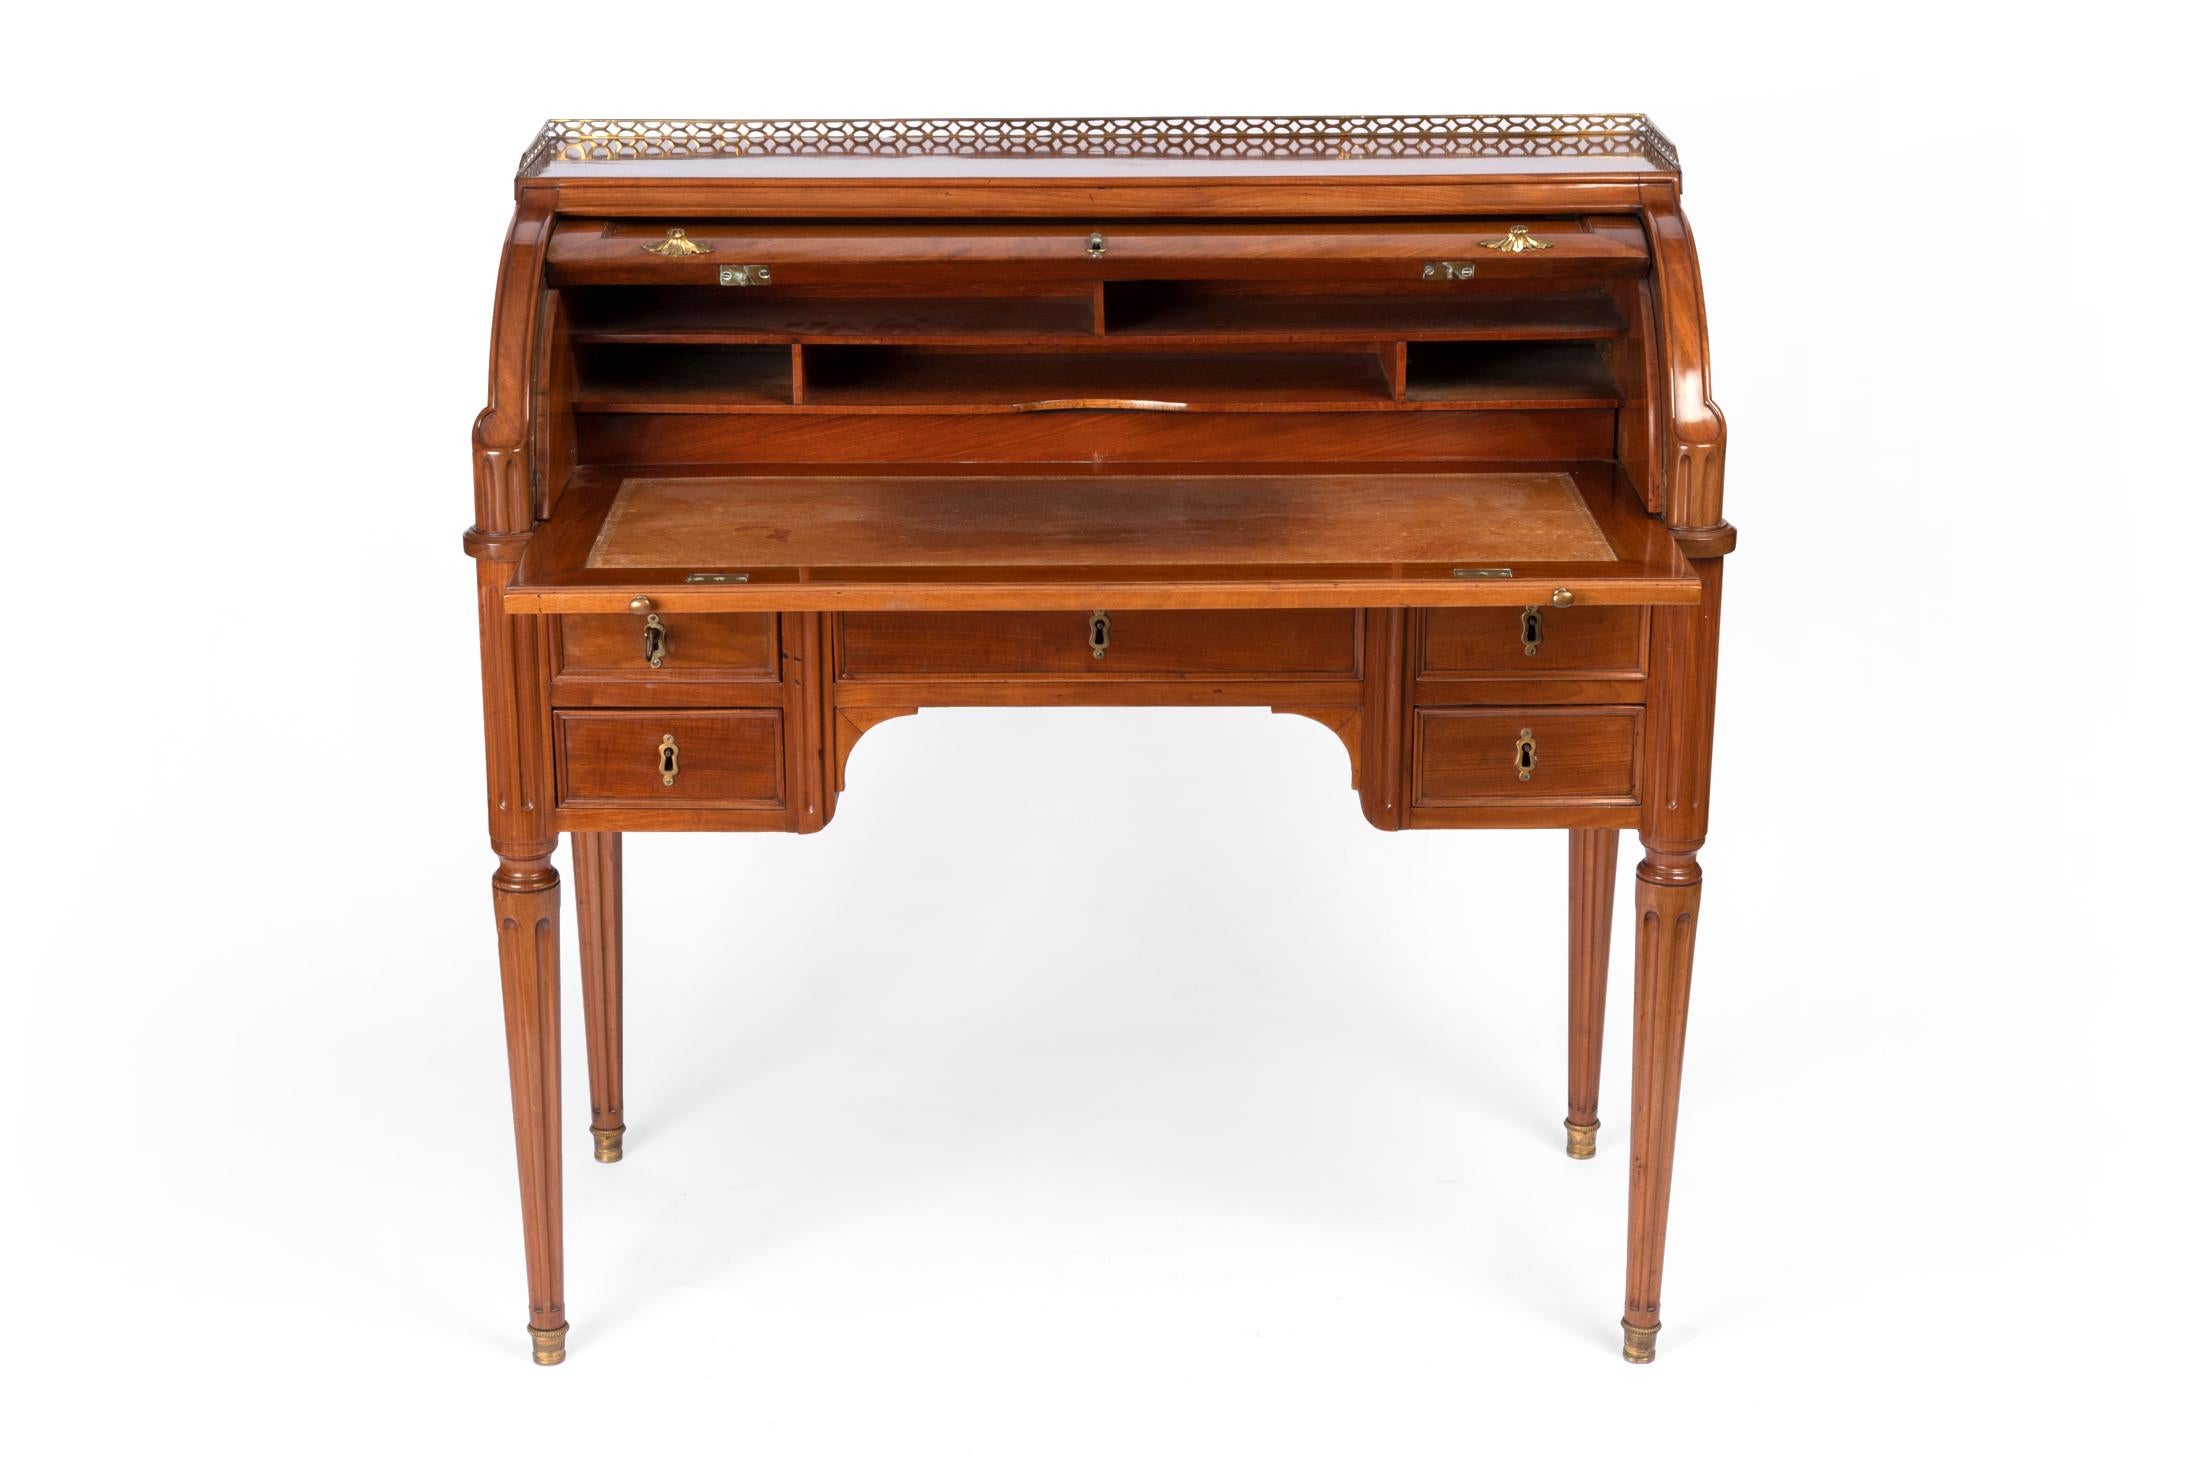 A small but elegant Louis XVI desk in molded mahogany and Caribbean mahogany veneer, engraved and gilded bronze ornamentation, the recess partly surrounded by an openwork gallery, the cylinder revealing five compartments, the border opening with